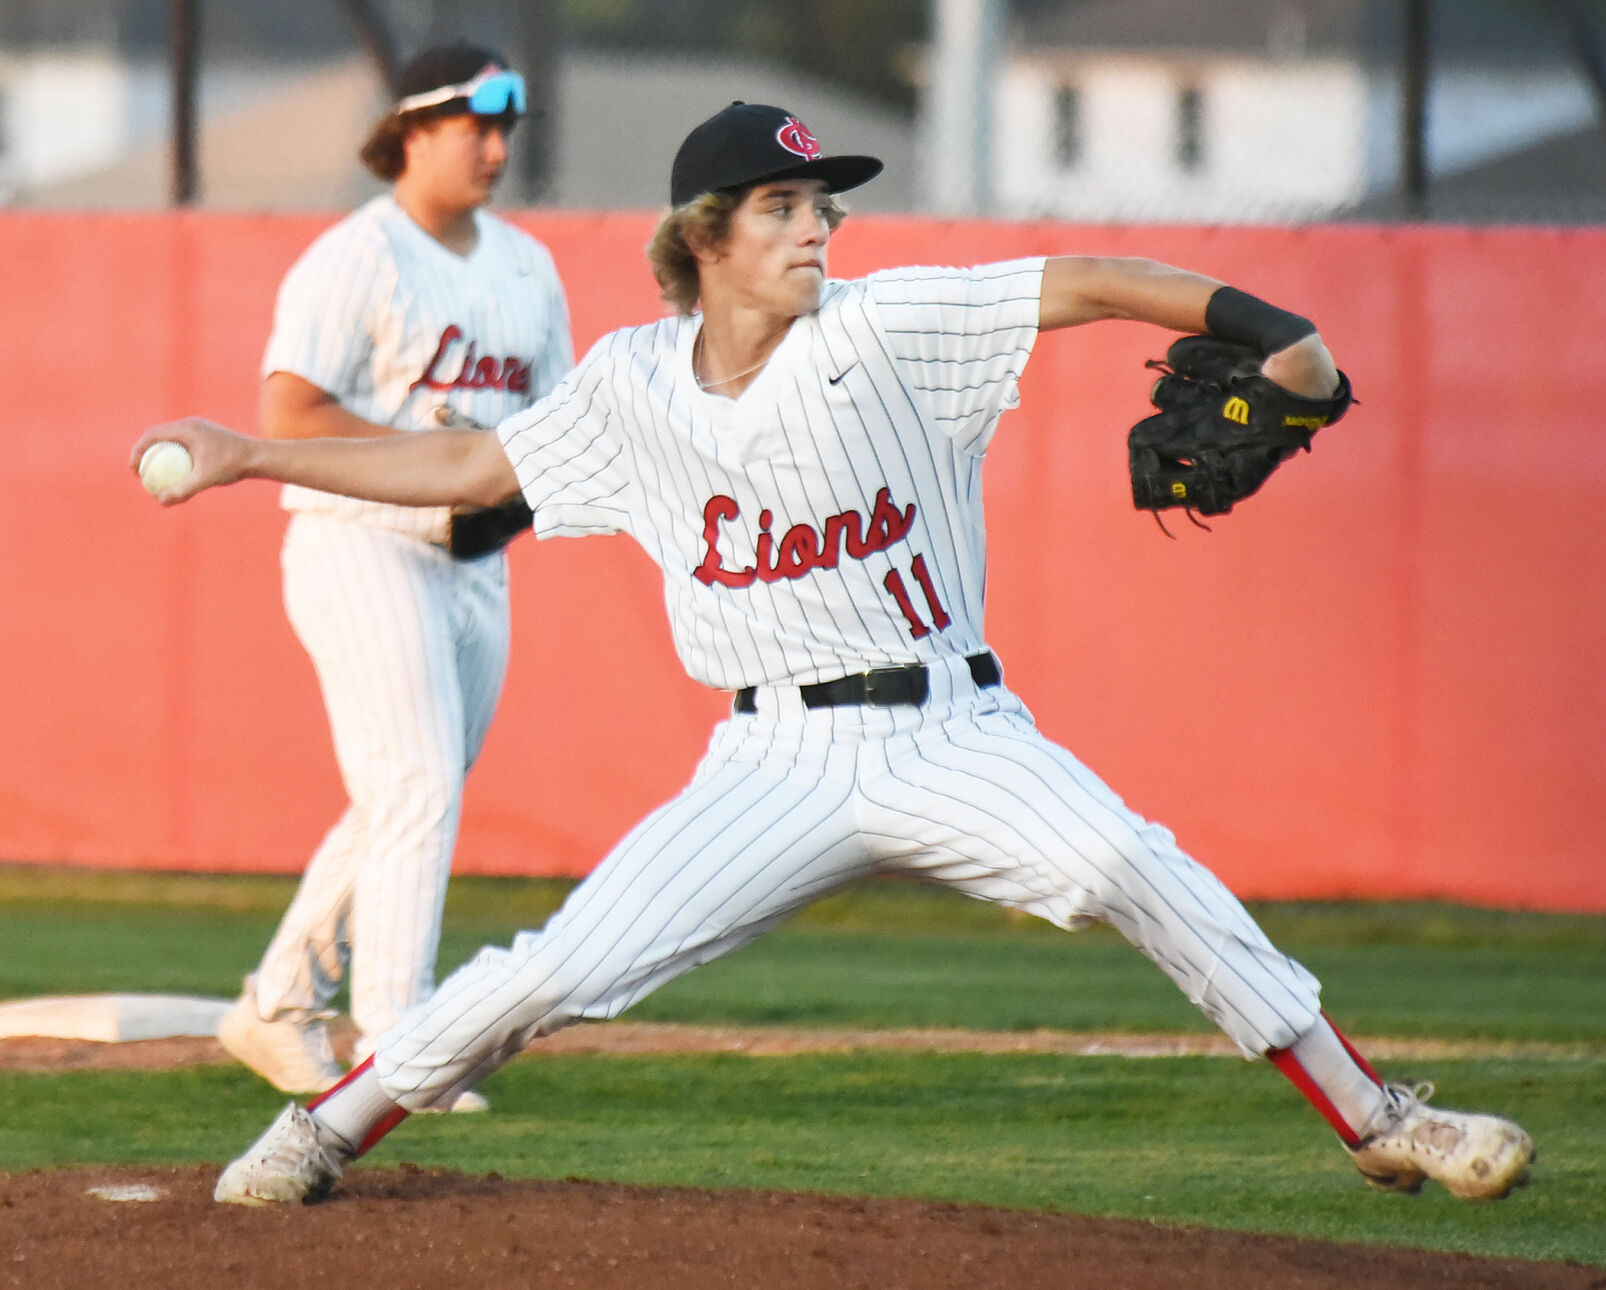 Greenville Lions whip Mansfield Summit 14-0 in non-district baseball